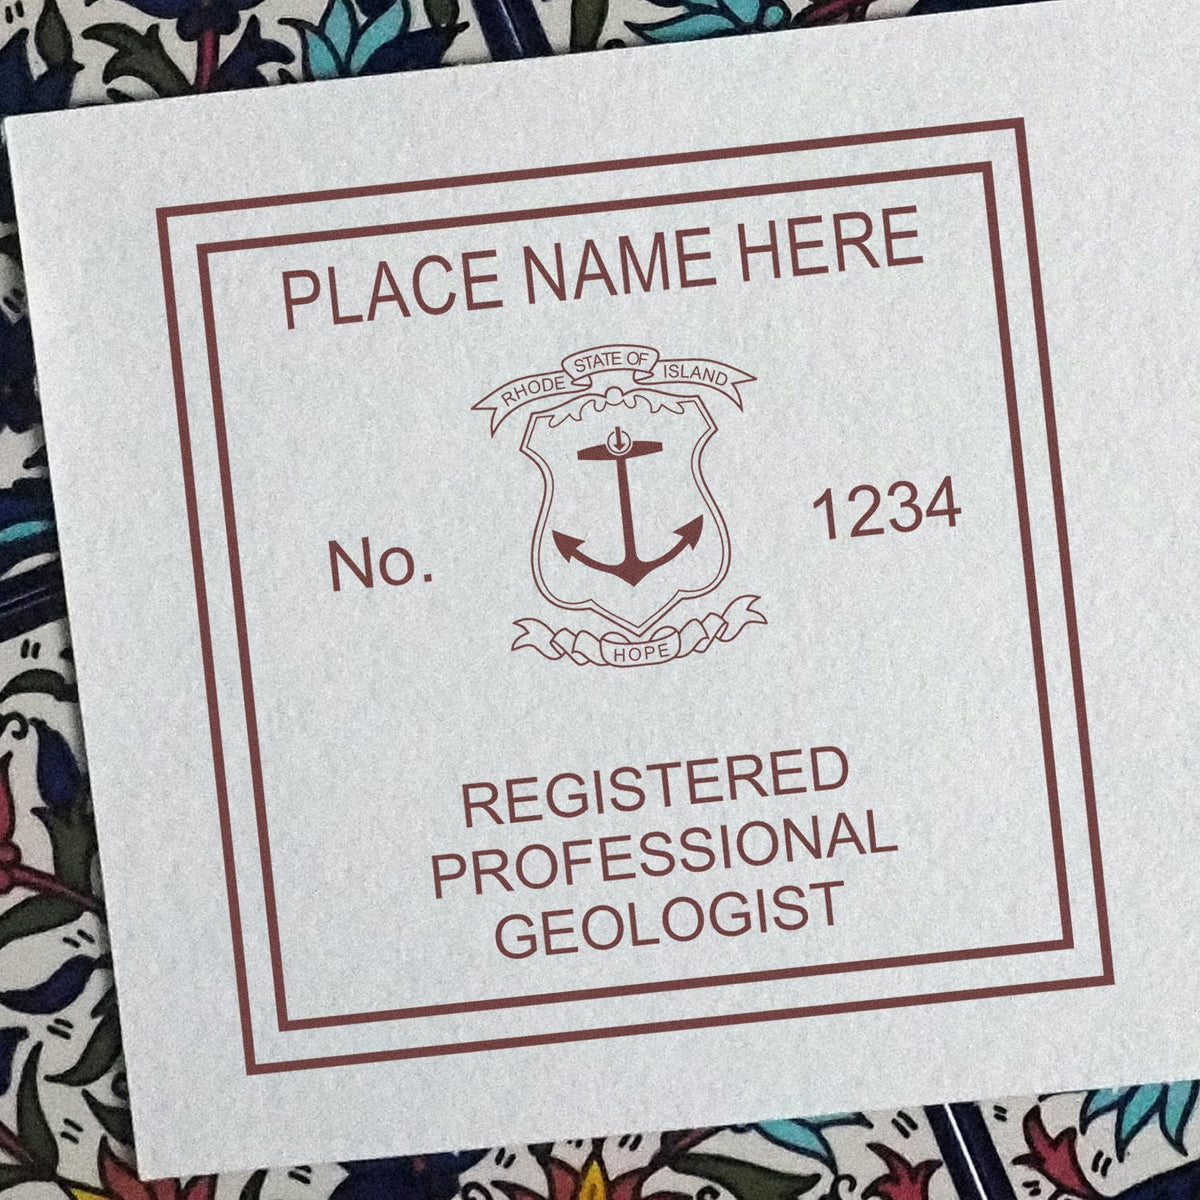 Another Example of a stamped impression of the Digital Rhode Island Geologist Stamp, Electronic Seal for Rhode Island Geologist on a office form